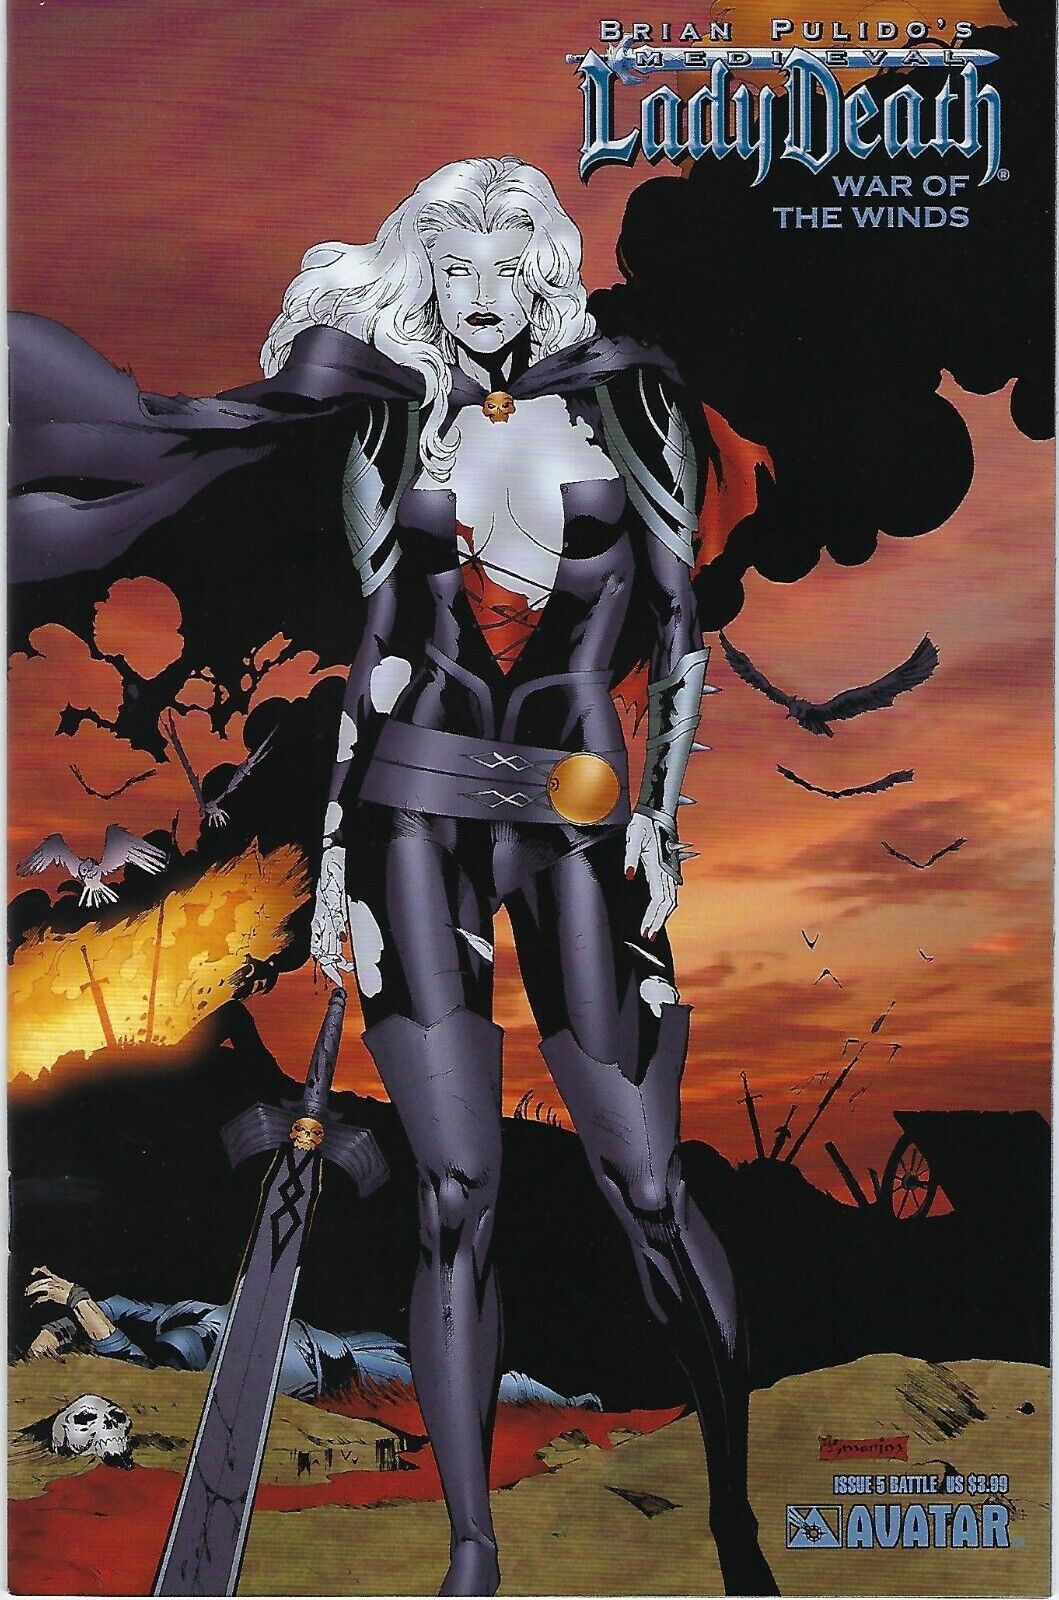 Medieval Lady Death : War of the Winds # 5 Battle Variant Cover !! VF/NM